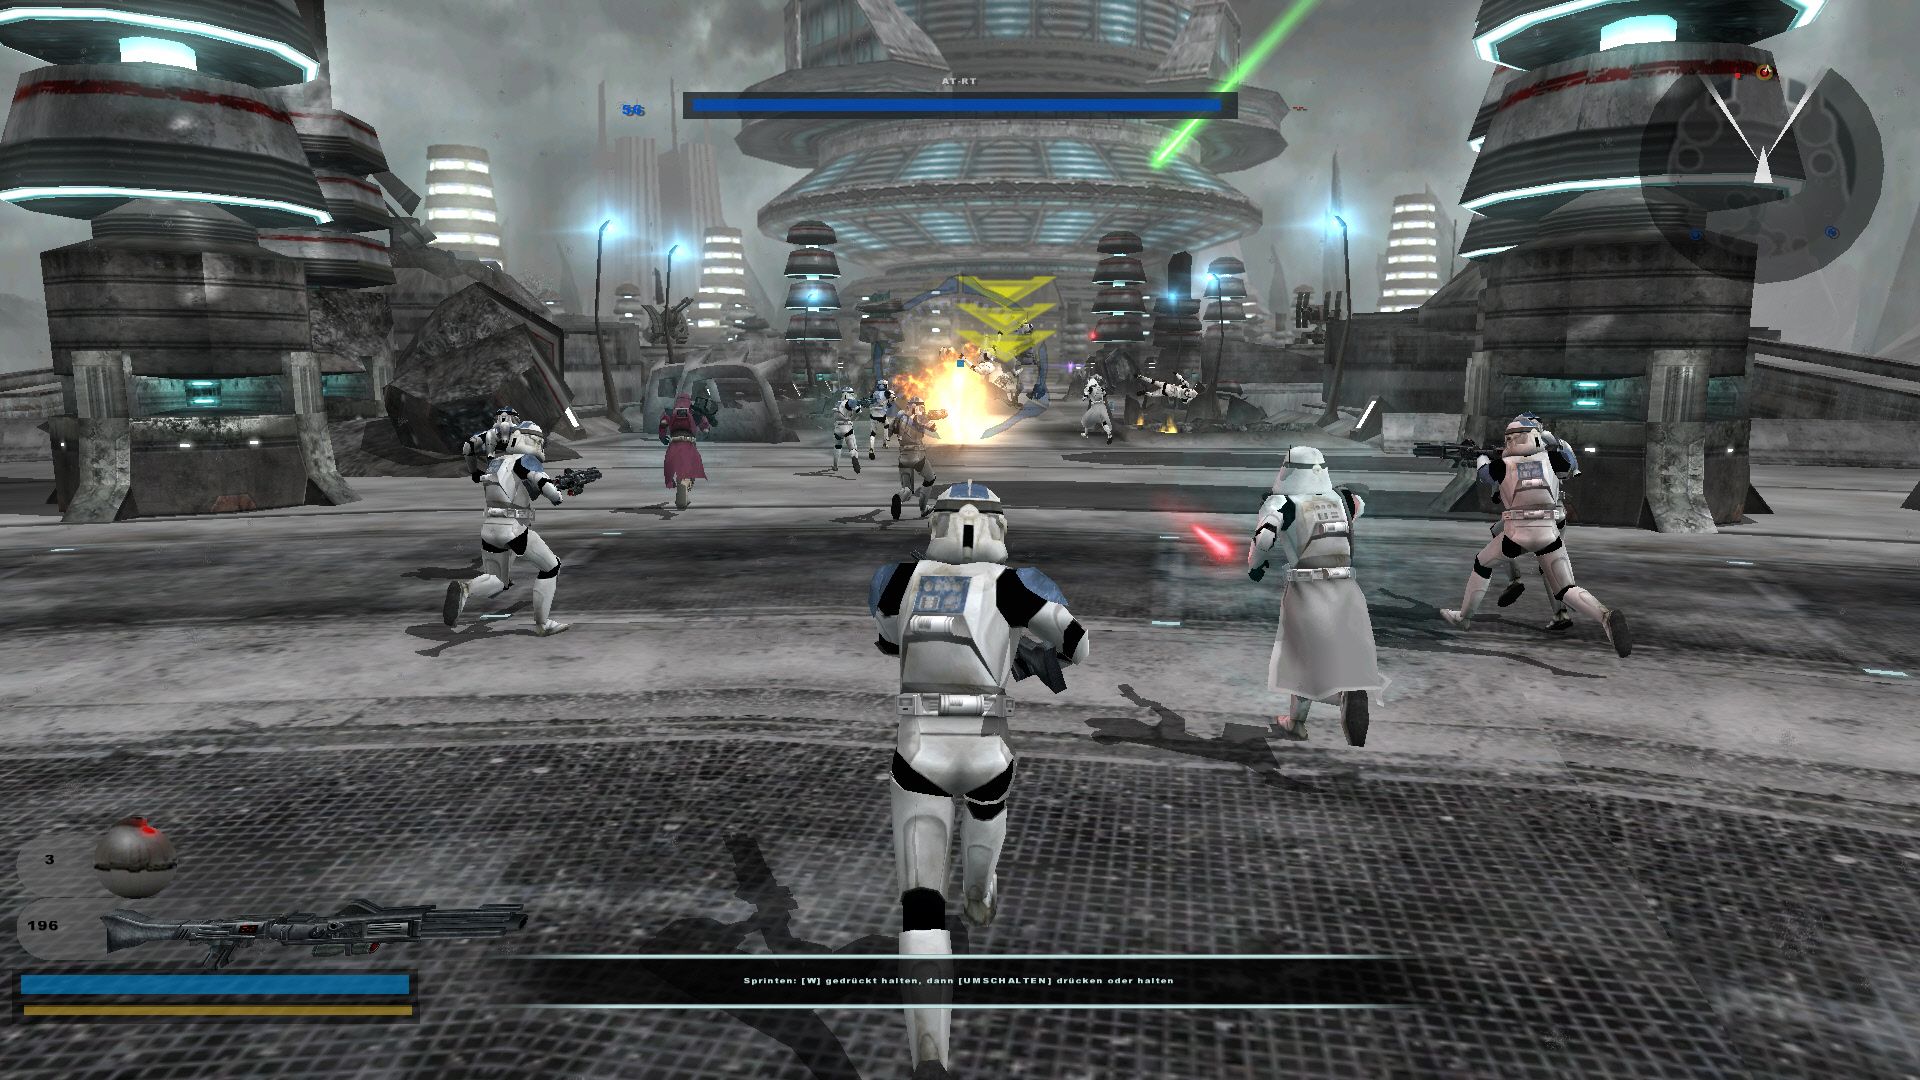 The Original Star Wars: Battlefront 2 Gets an Update 12 Years Later